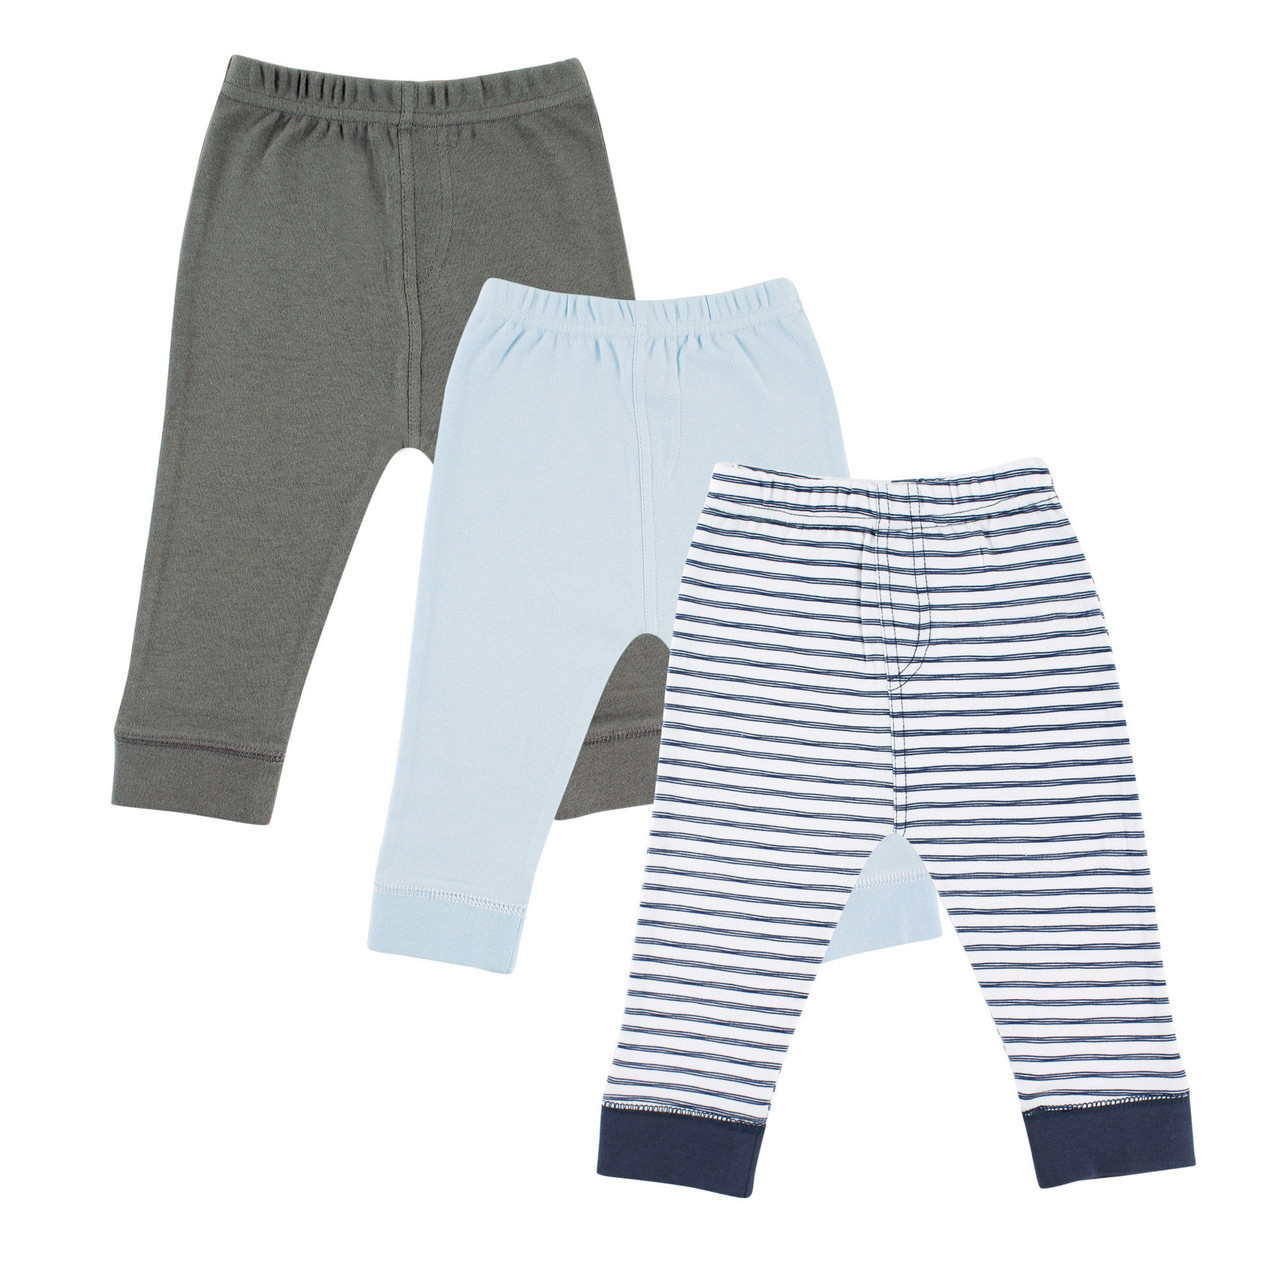 Navy Stripes Luvable Friends Tapered Ankle Pants 3-Pack